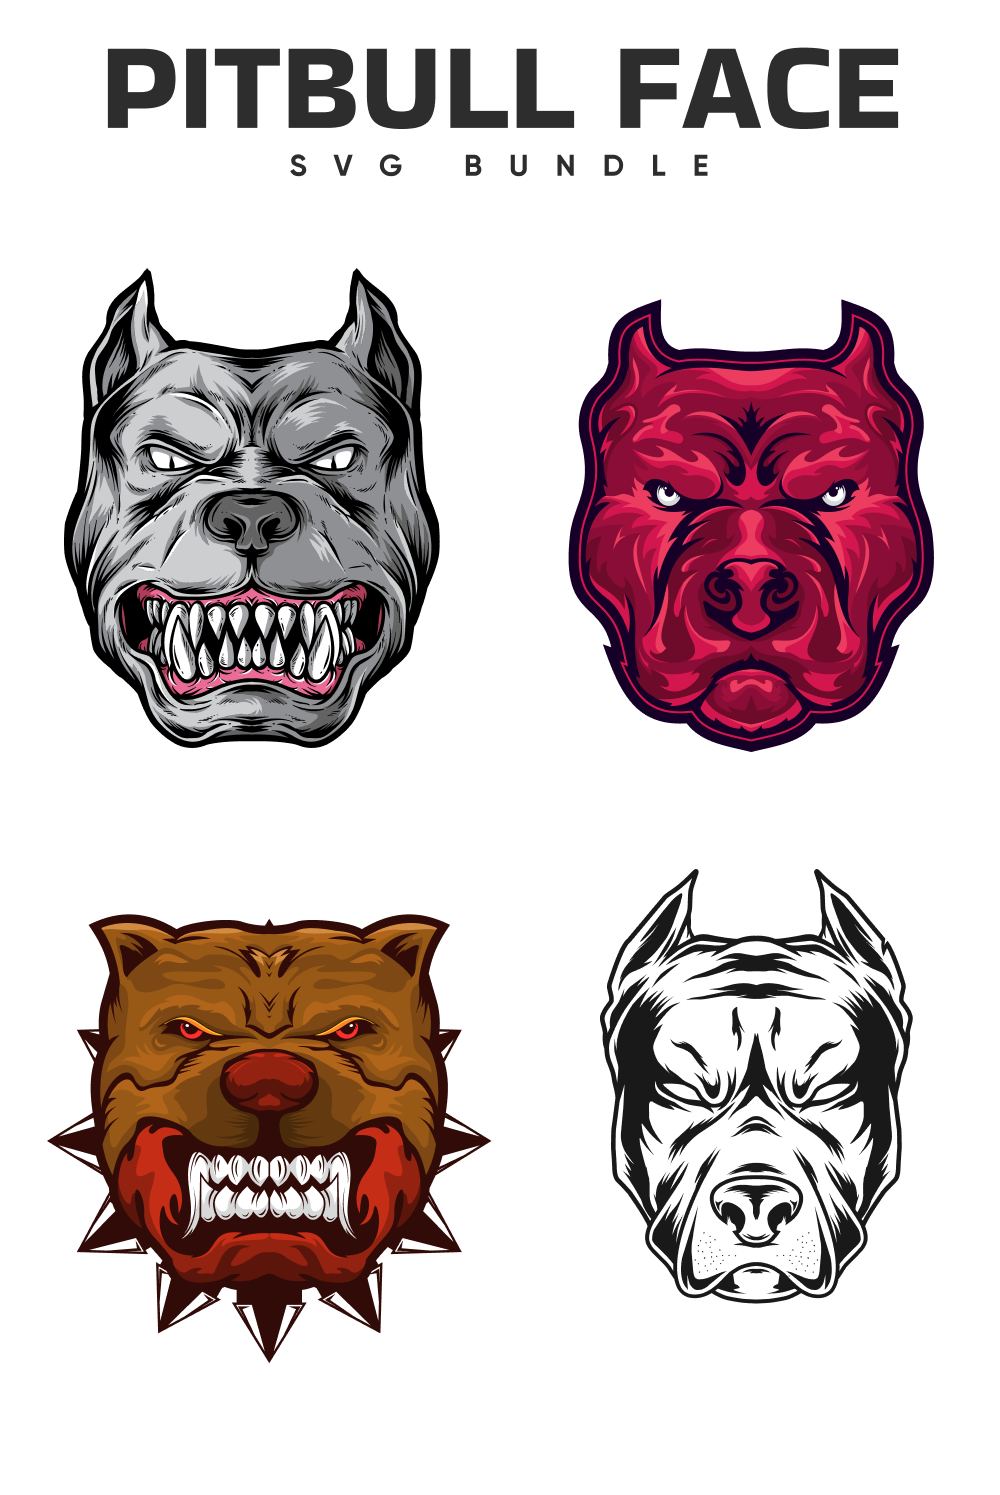 The pitbull face logo is shown in four different colors.